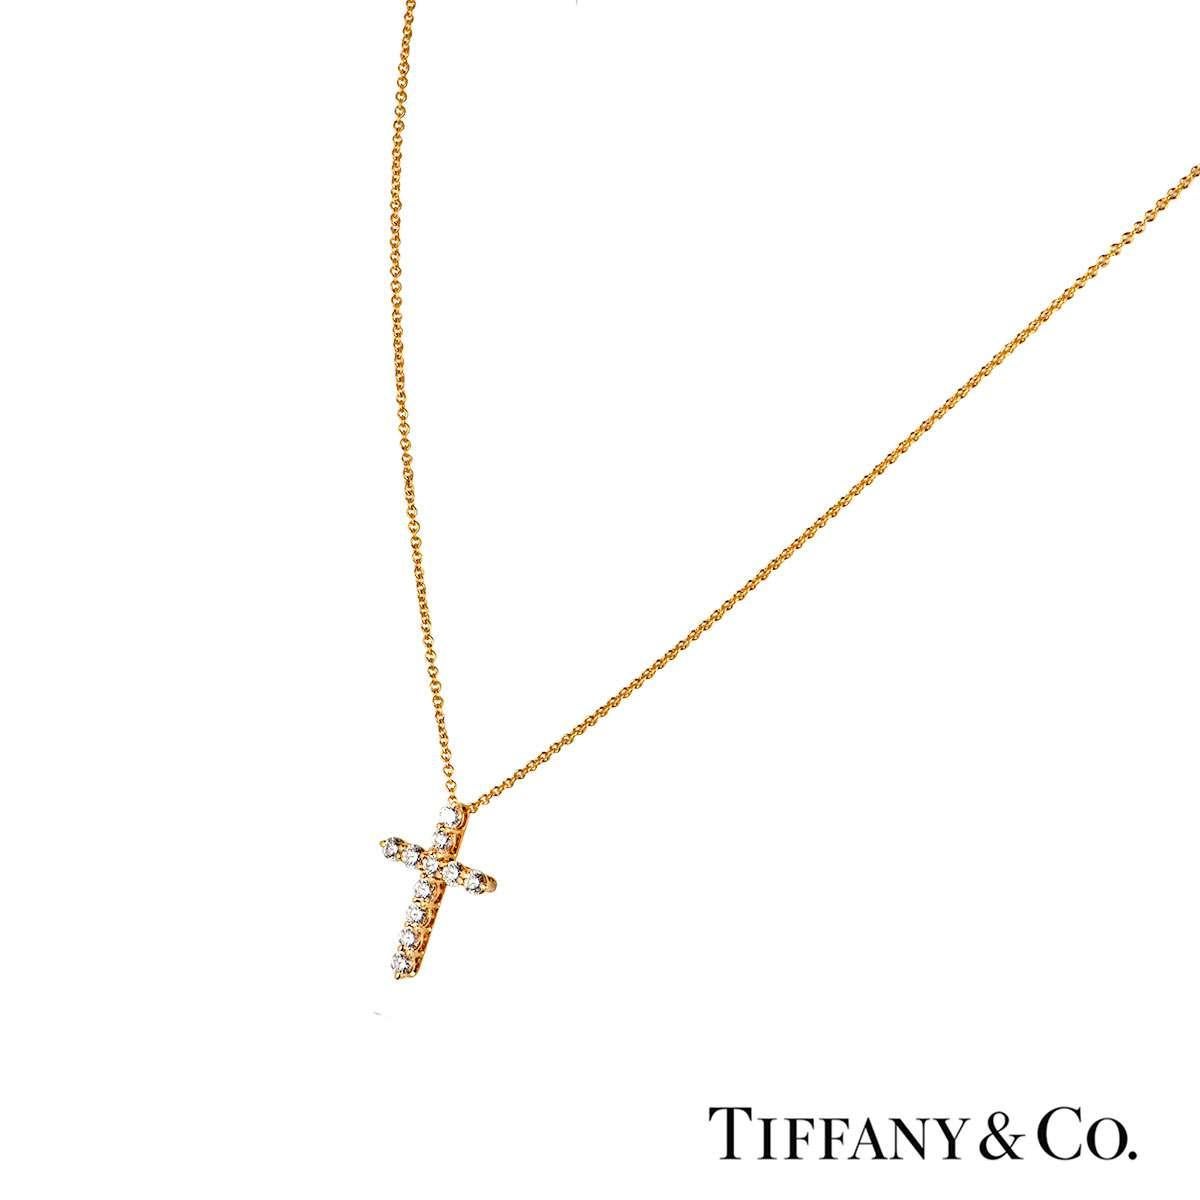 An 18k yellow gold diamond pendant by Tiffany & Co. The pendant features a cross motif which is made up of 11 round brilliant cut diamonds totalling approximately 0.44ct. The pendant features a bolt spring clasp on a 16 inch chain and has a gross